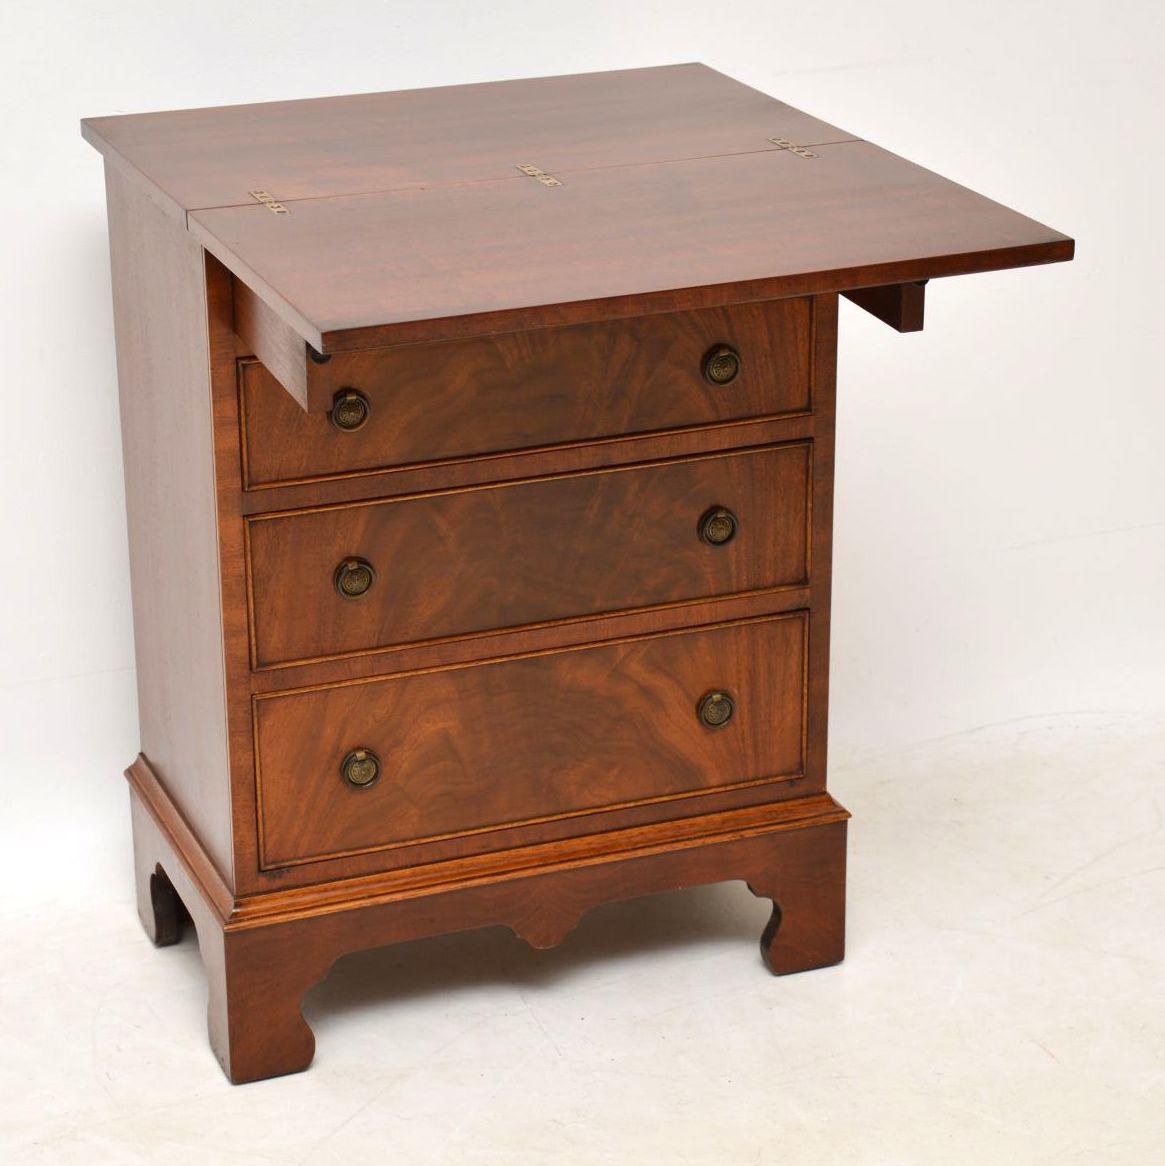 Small proportioned antique Georgian style mahogany bachelors chest on bracket feet, in good condition, having just been French polished. It’s flame mahogany on the top and drawer fronts, which have original brass handles and are graduated in depth.